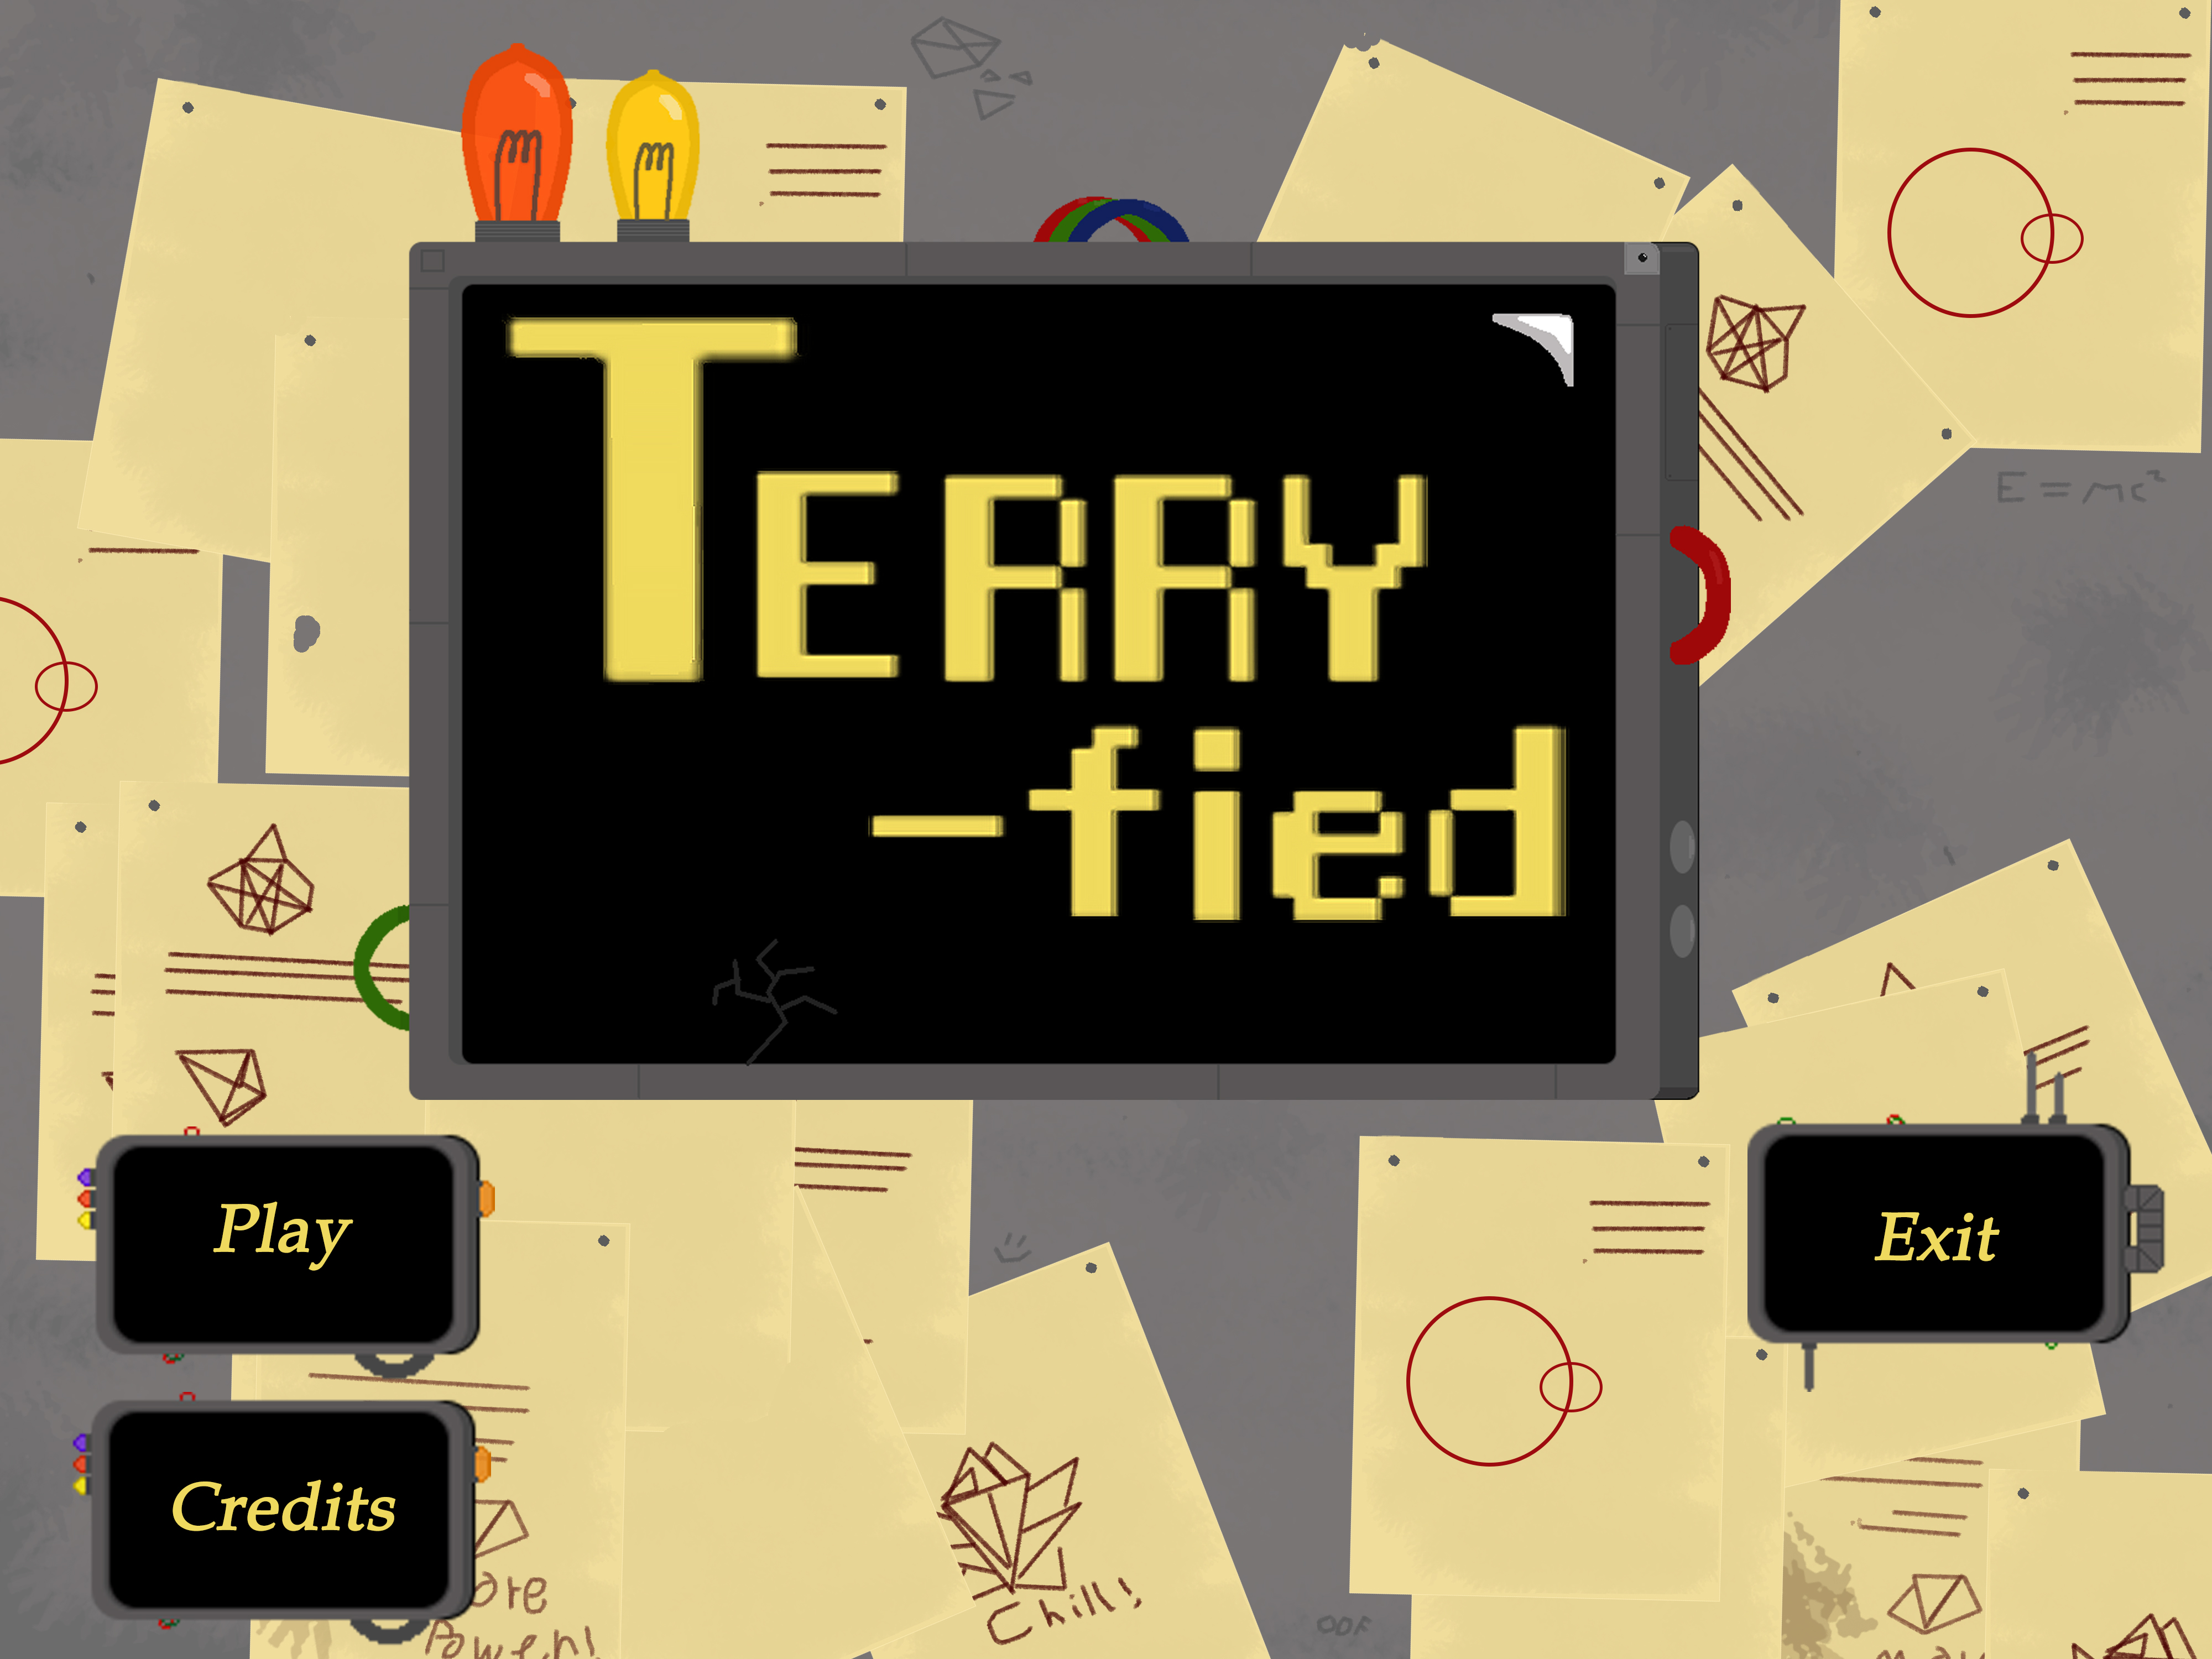 Terry-fied